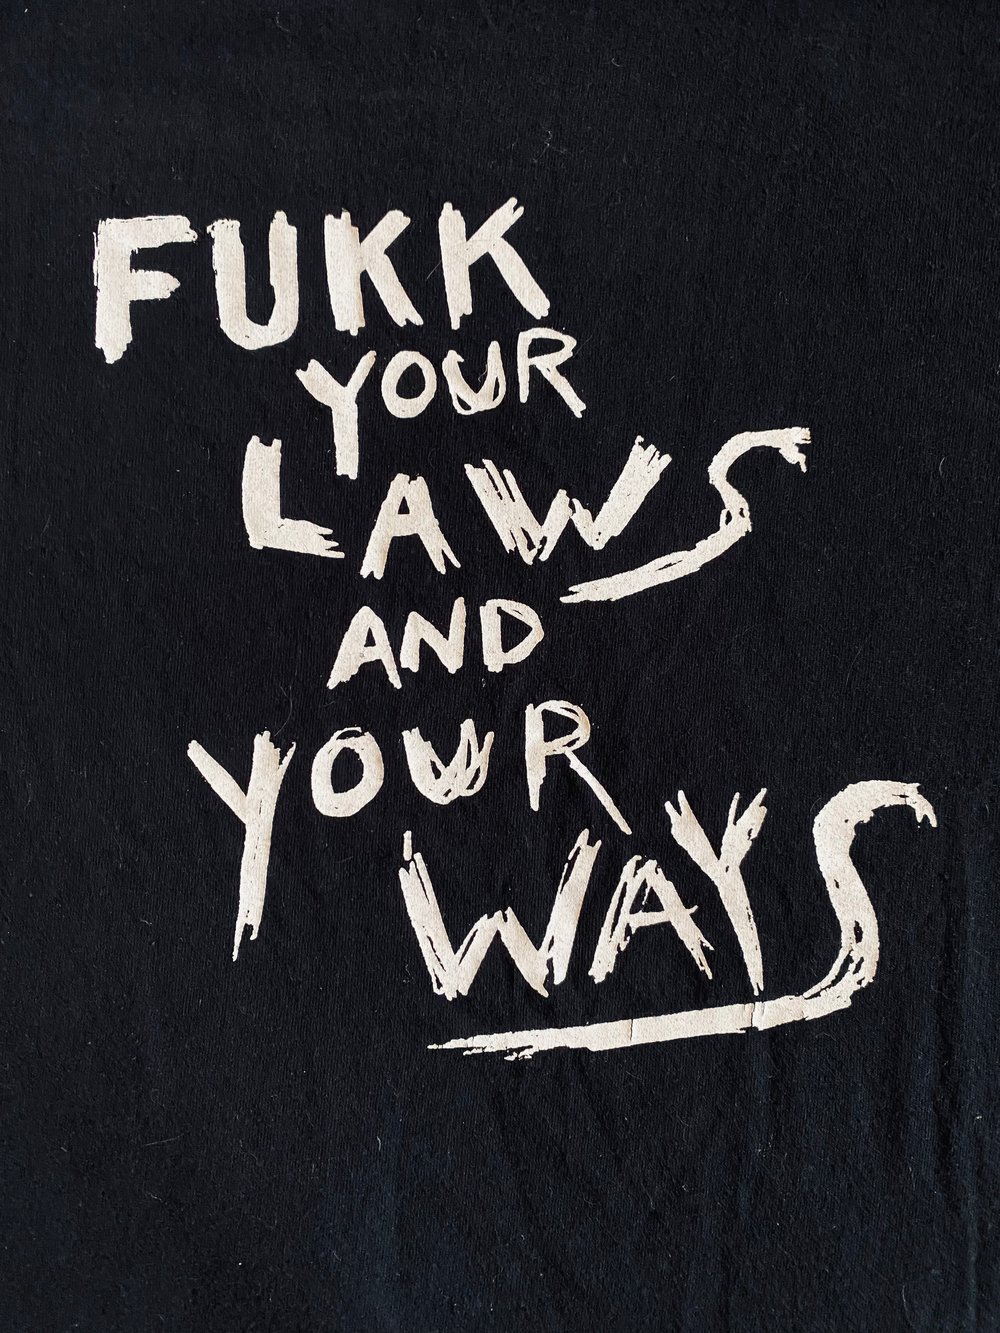 The Obsessed - Fukk Your Laws and Your Ways Shirt